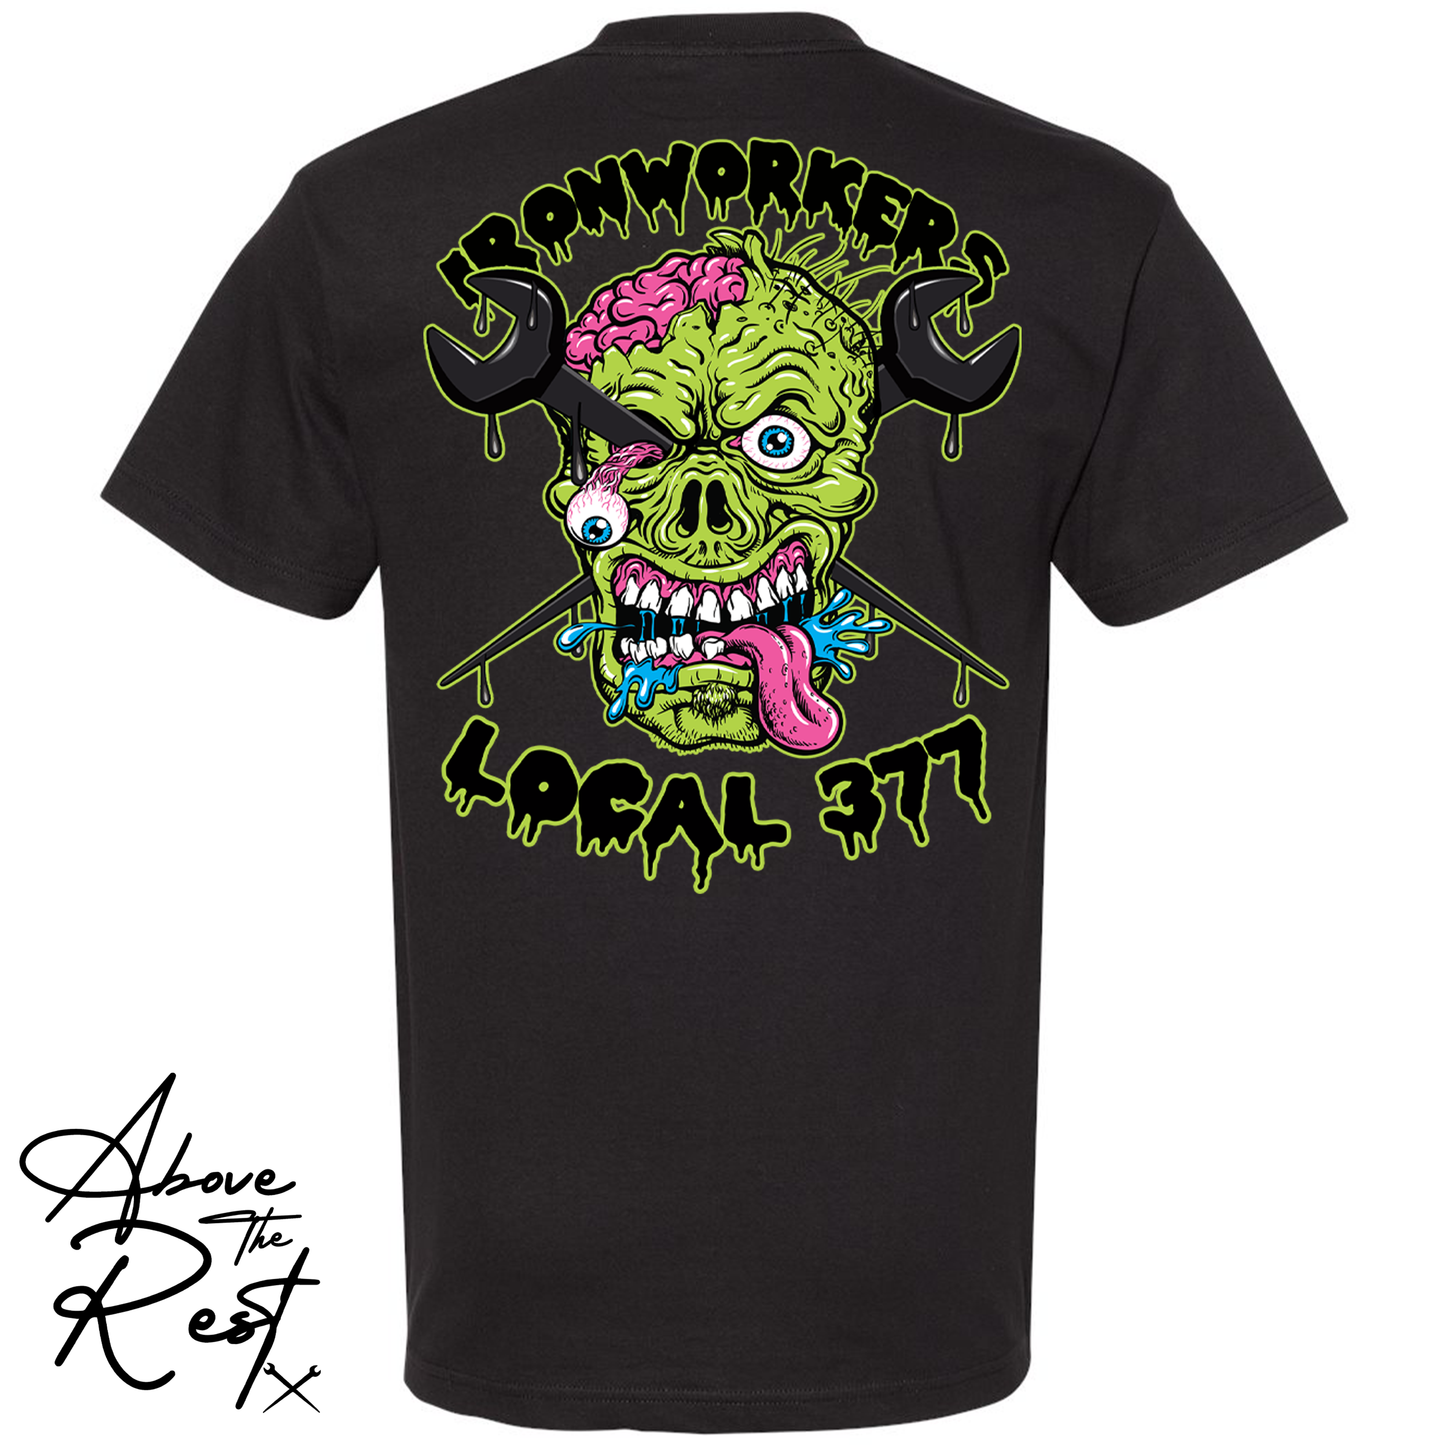 IW ZOMBIE T-SHIRT LOCAL 377